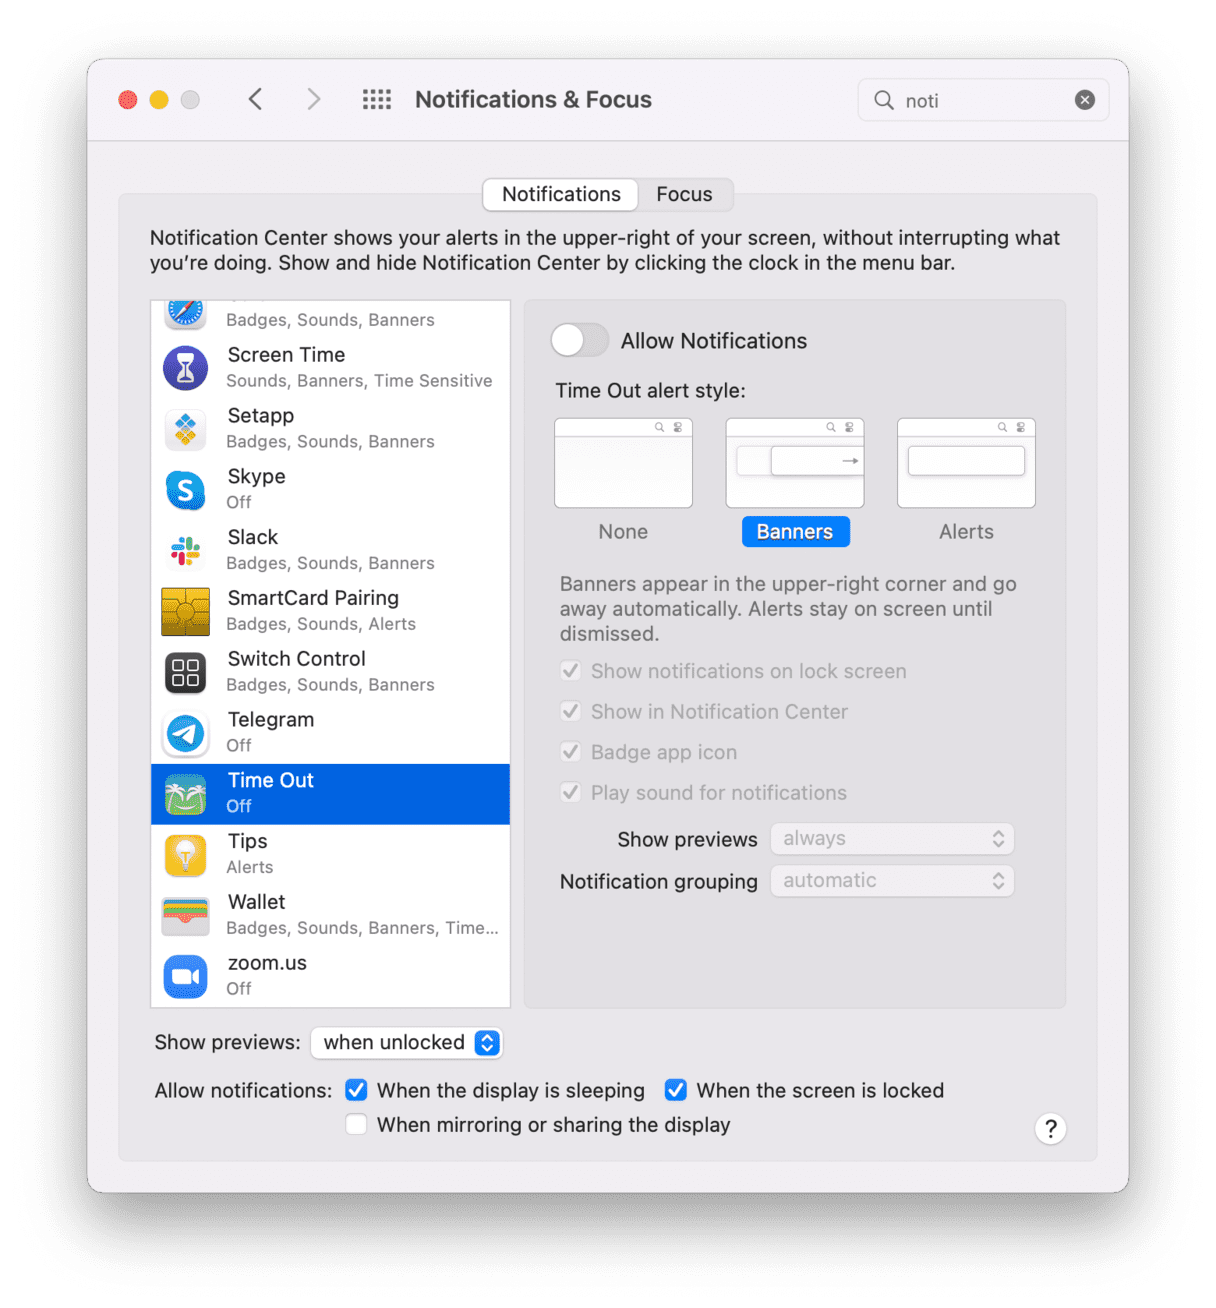 Turn off notifications in System Preferences. Go to Notifications & Focus, select the app and toggle off Allow Notifications.